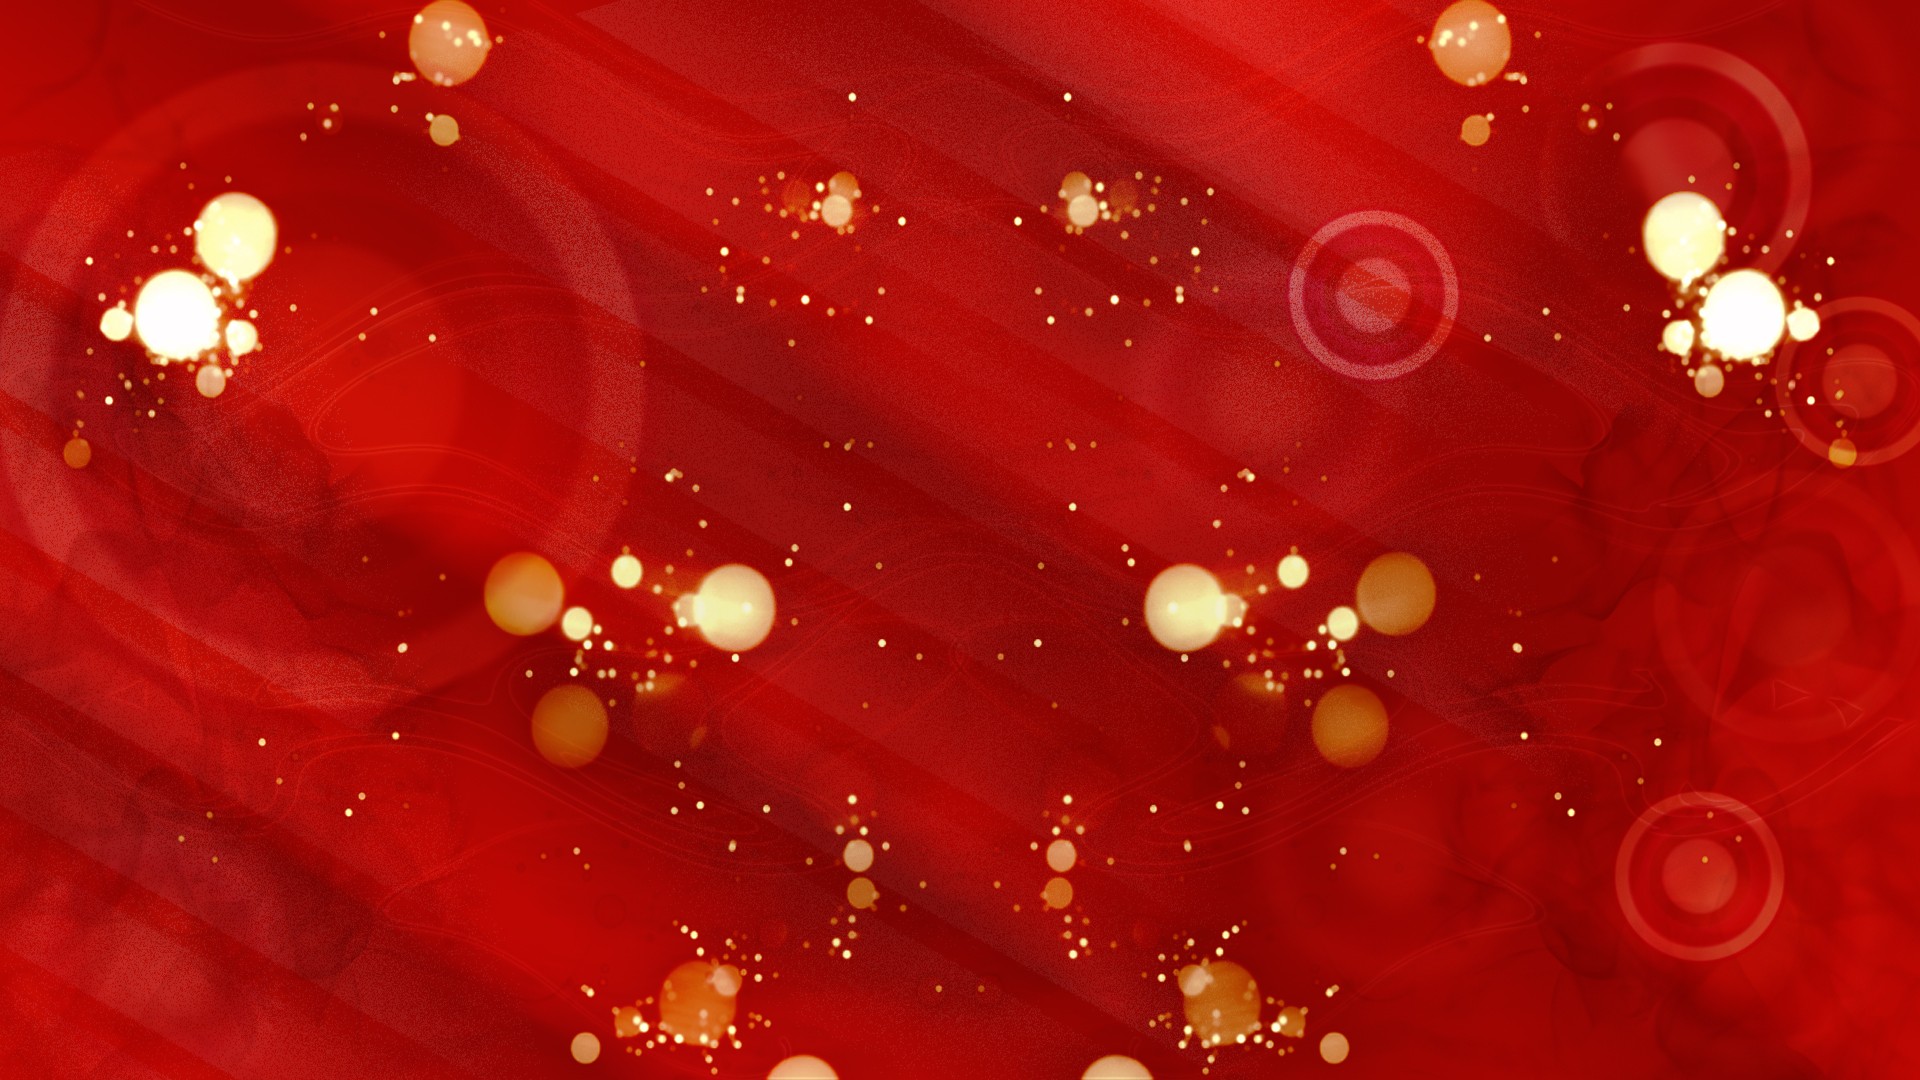 General 1920x1080 Christmas red background red artwork